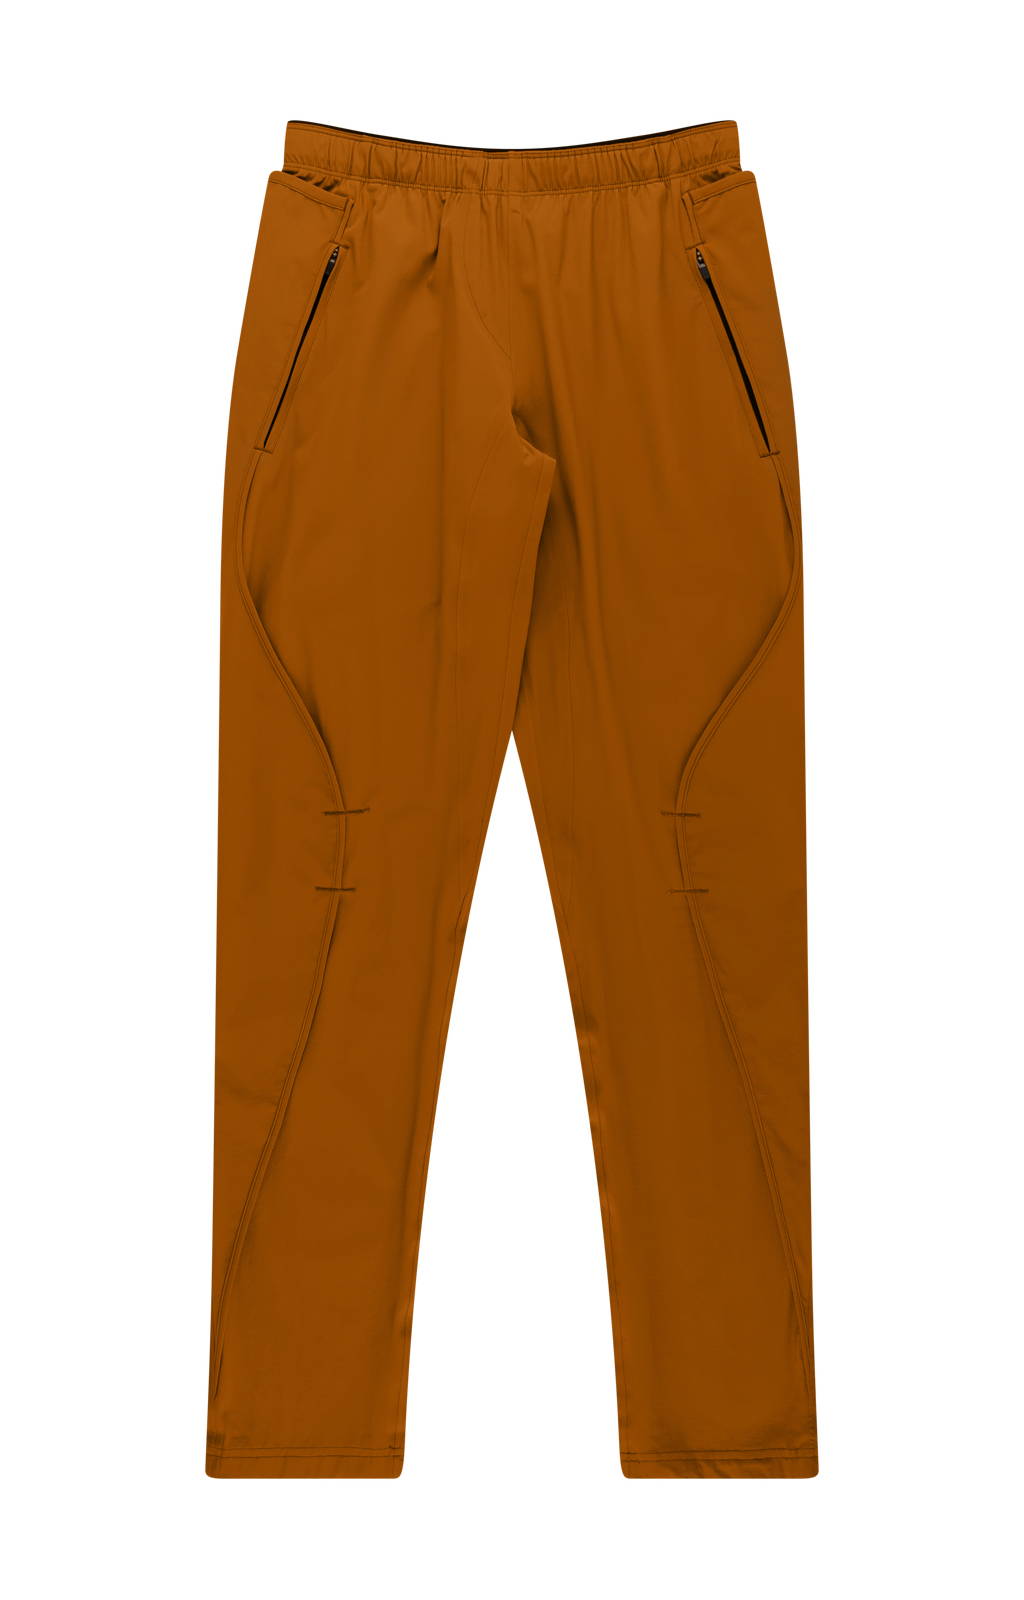 PURITY - METICULOUS CRAFTSMANSHIP, A BEAUTIFUL TRAVEL PANT GINGER